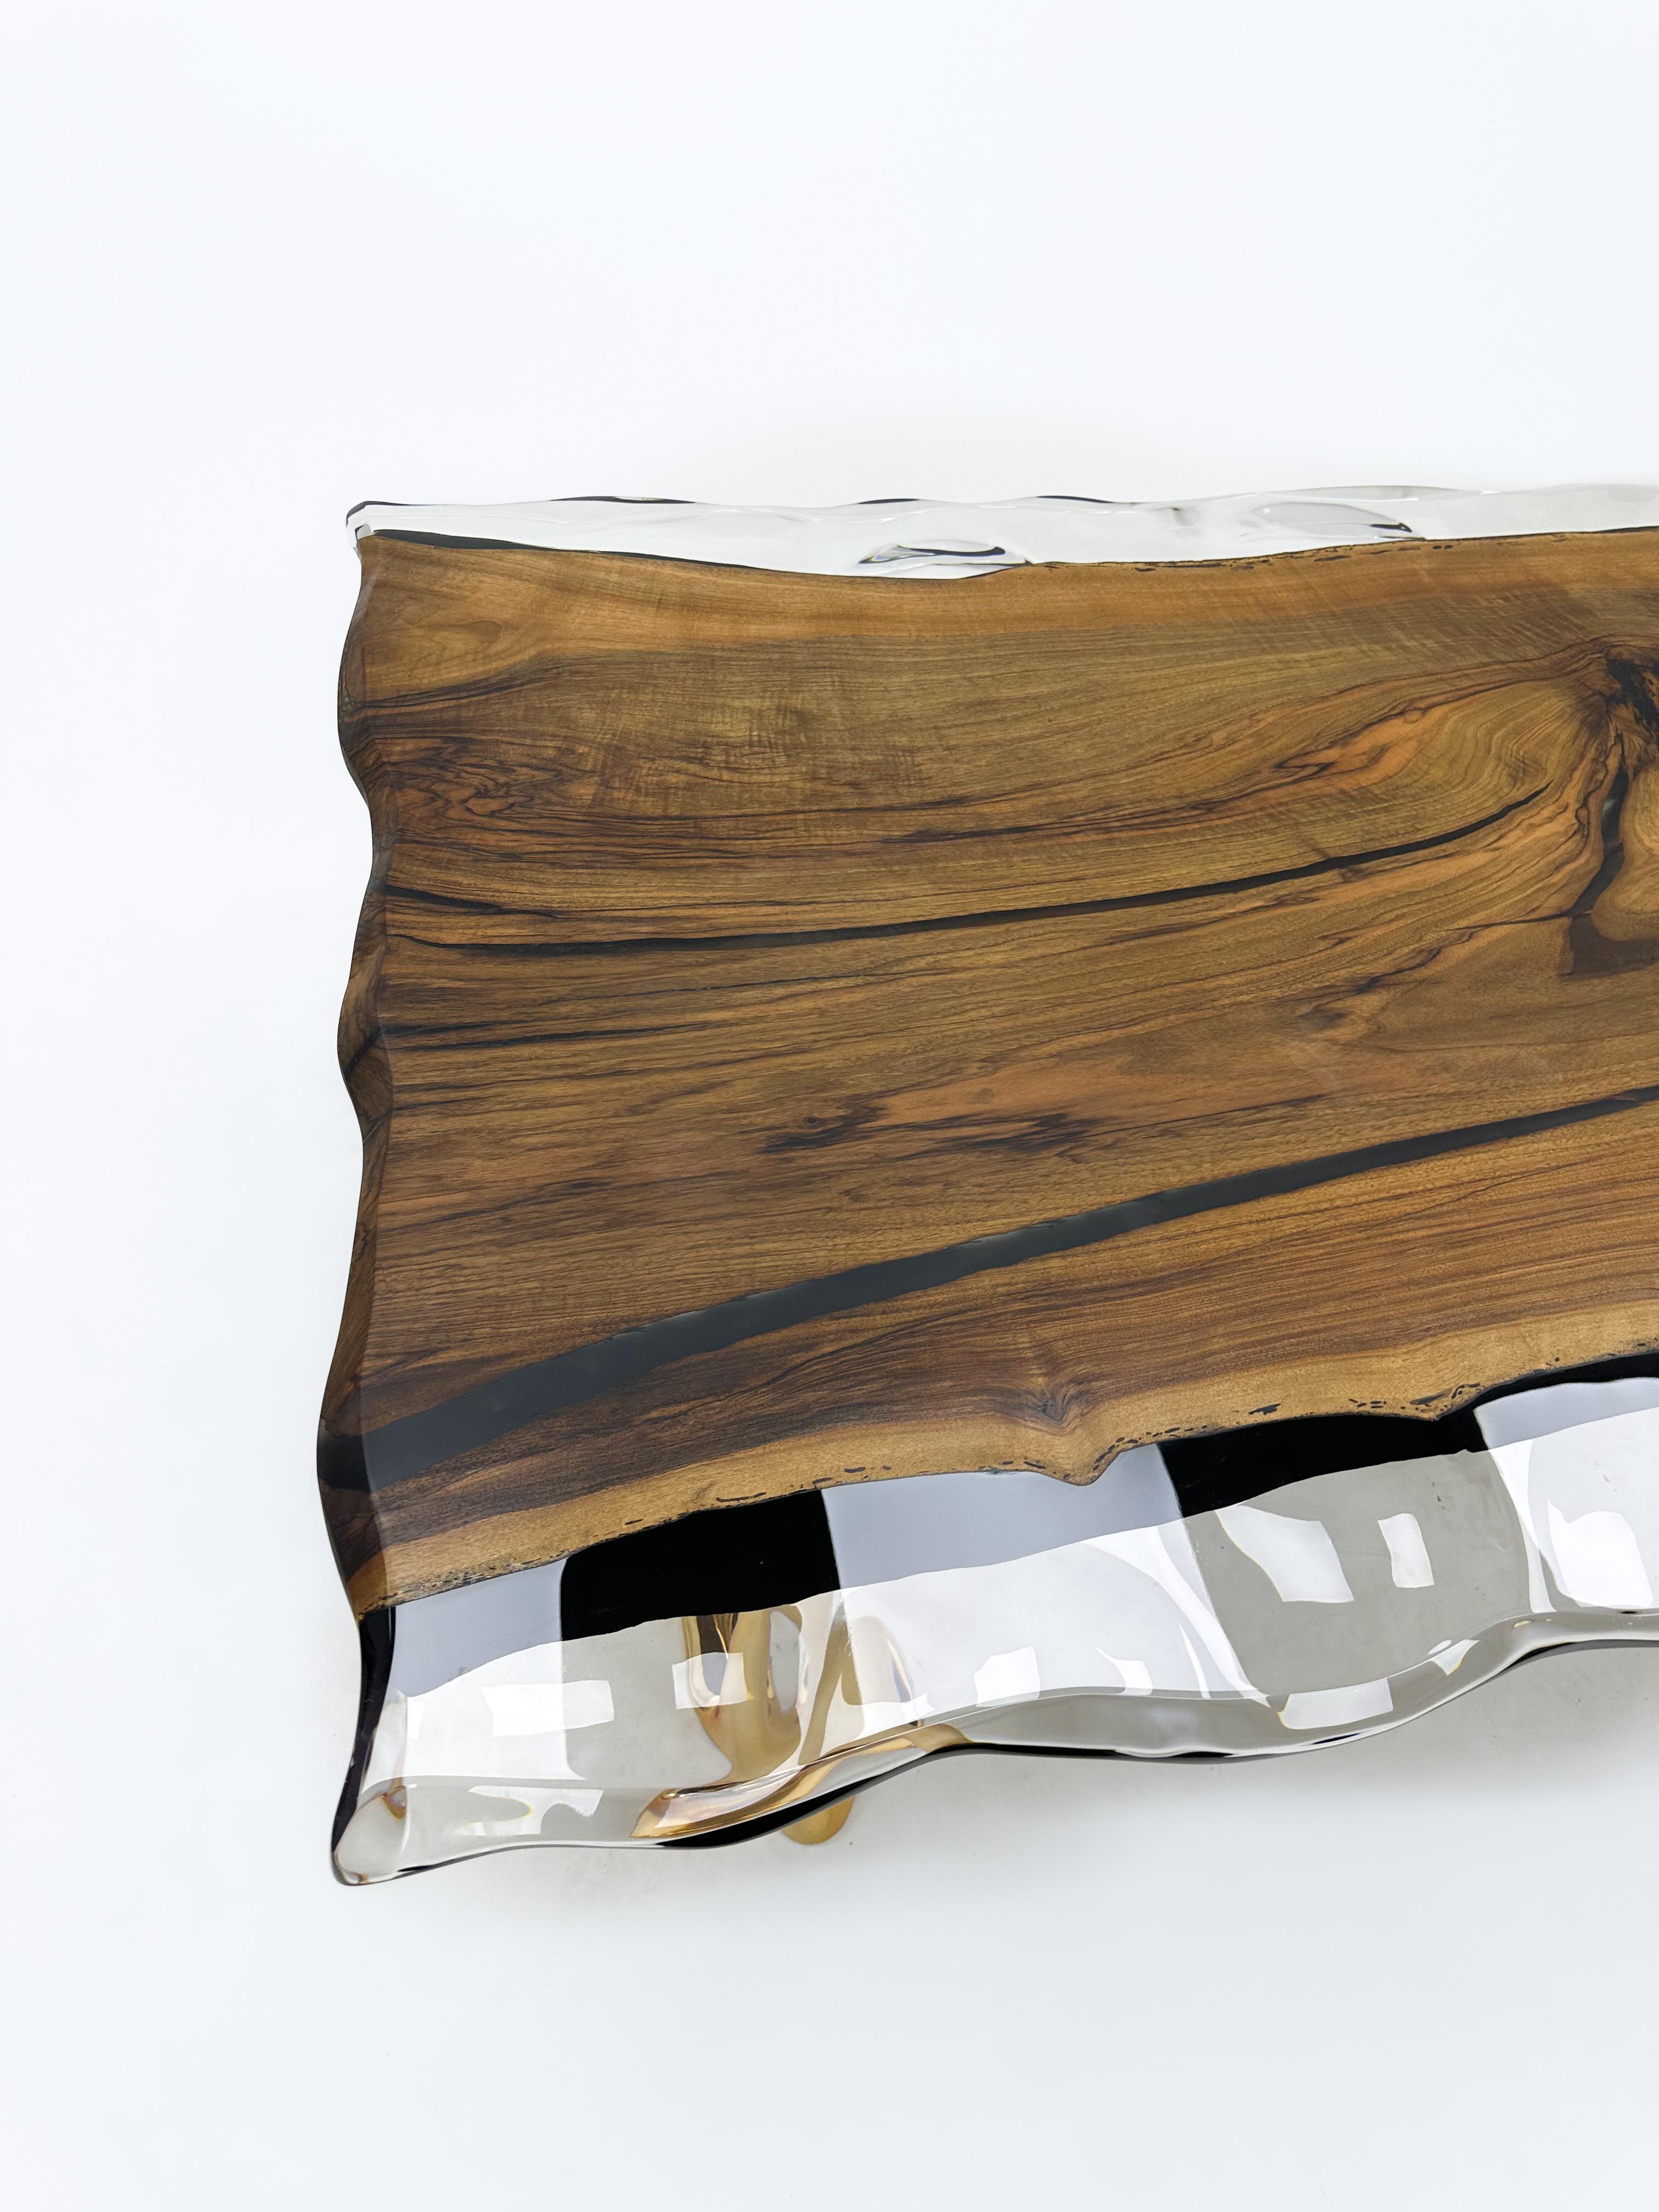 Clear Epoxy Resin Table 

Introducing our Walnut Wood Clear Epoxy Resin Table, a true masterpiece of craftsmanship! This table is made of walnut wood, selected for its unique character. What makes it special is the clear epoxy resin that beautifully